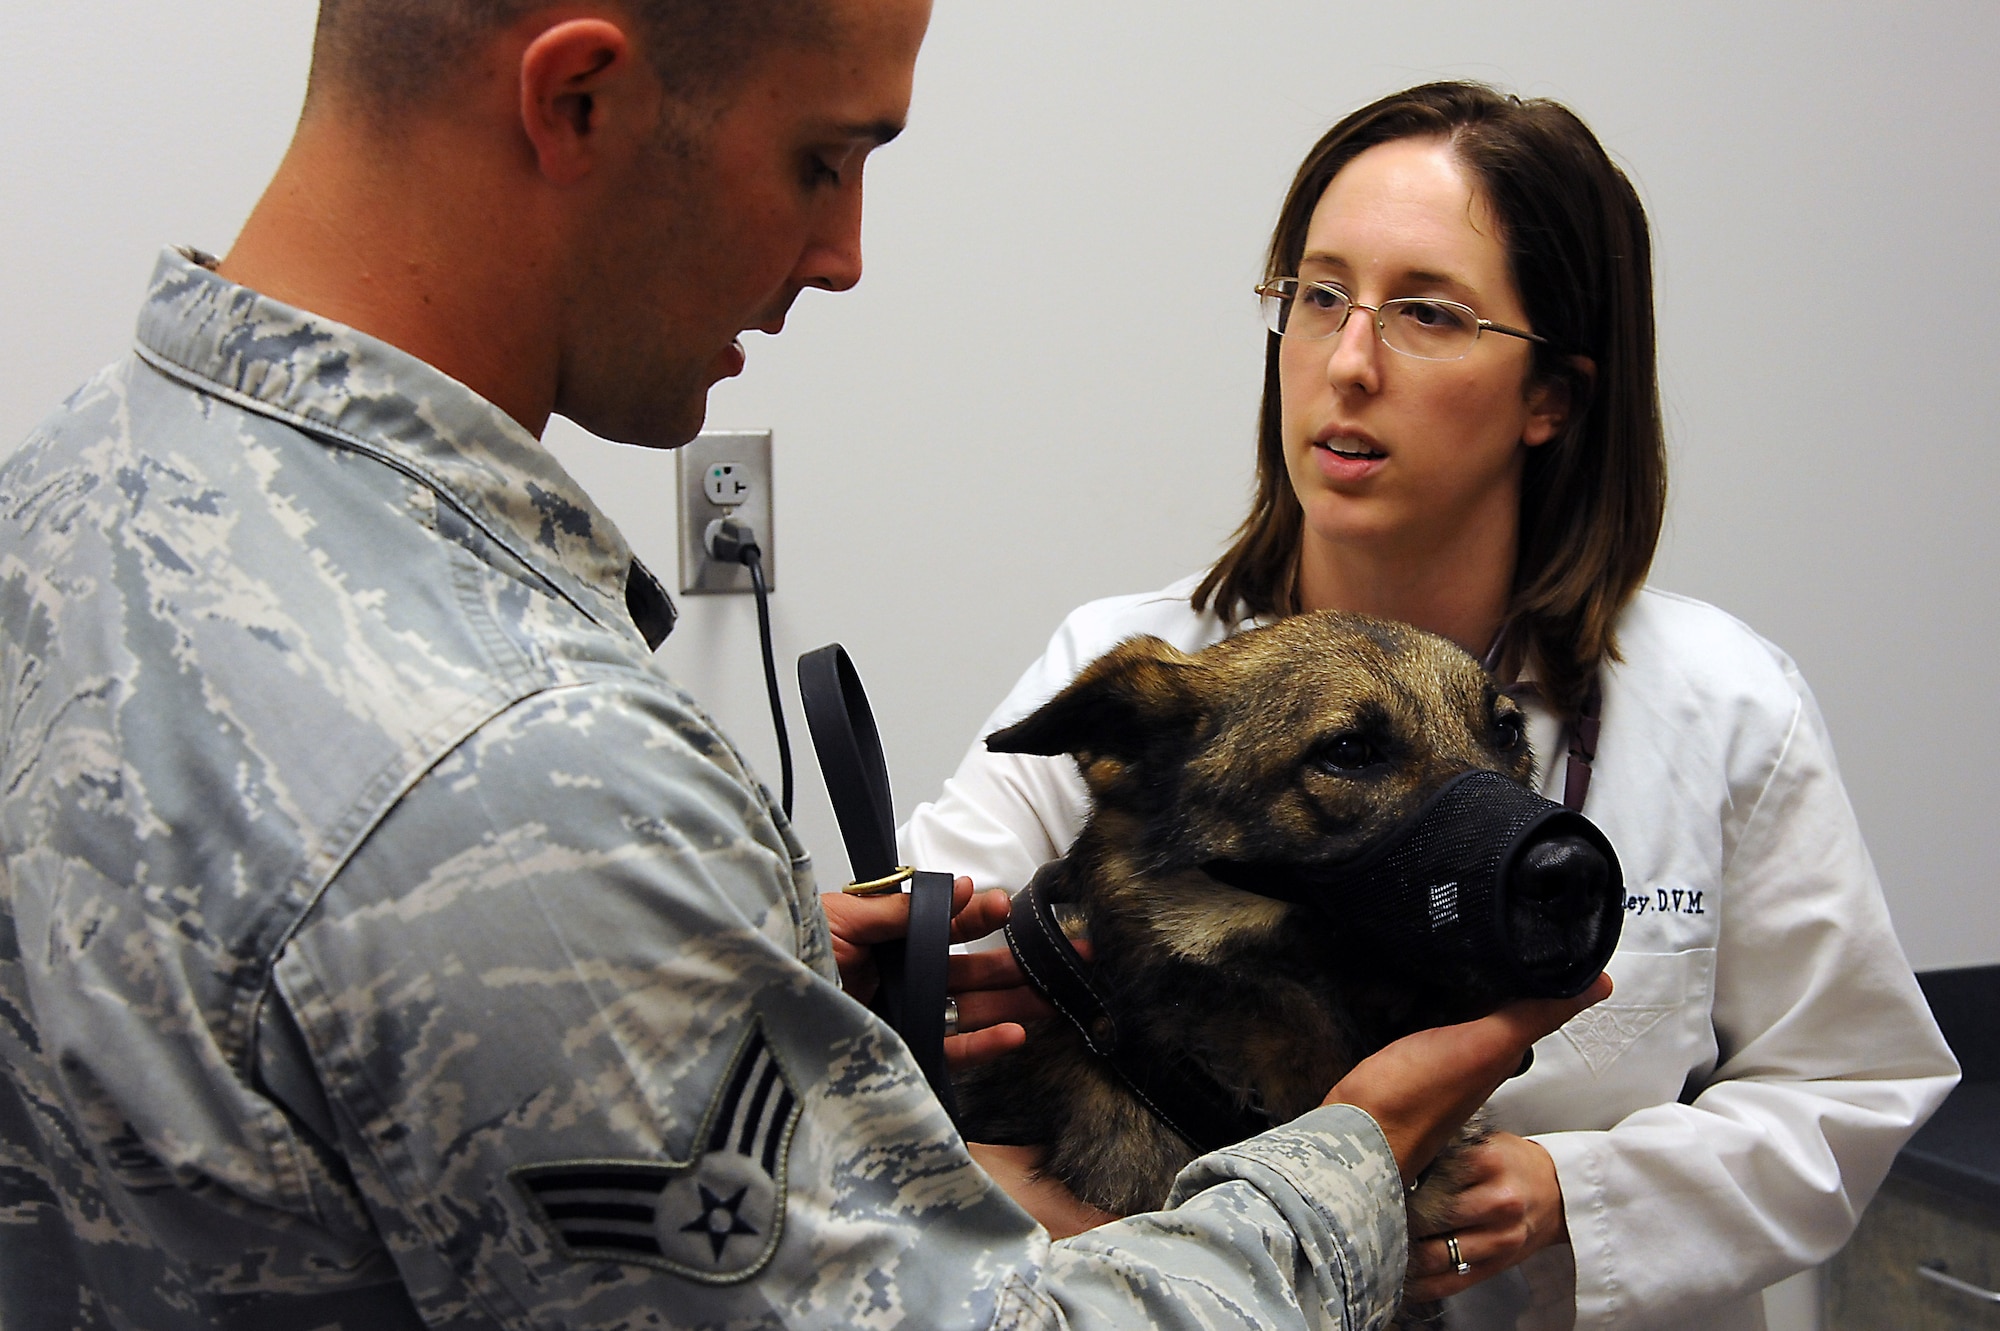 Senior Airman Shane Truman, 509th Security Forces Squadron military working dog handler, explains the symptoms of his working dog, Norbo, to Joanna Kuecker, Army Public Health Command District-Carson veterinarian, at Whiteman Air Force Base, Mo., July 3, 2013. Norbo suffers from allergies and is on medications to regulate his symptoms. (U.S. Air Force photo by Airman 1st Class Shelby R. Orozco/Released)